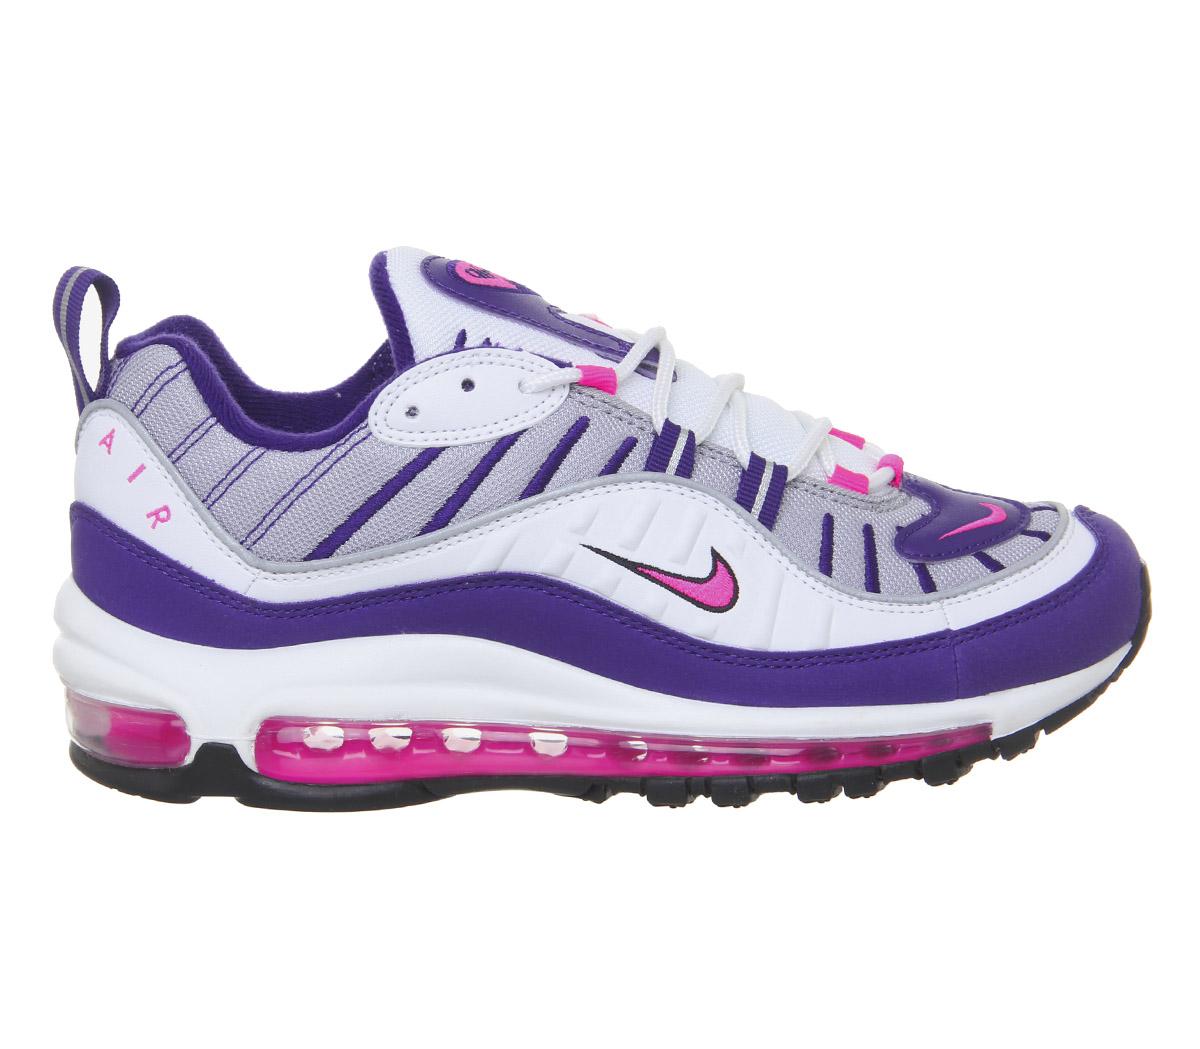 NikeAir Max 98 TrainersWhite Racer Pink Reflect Silver Black